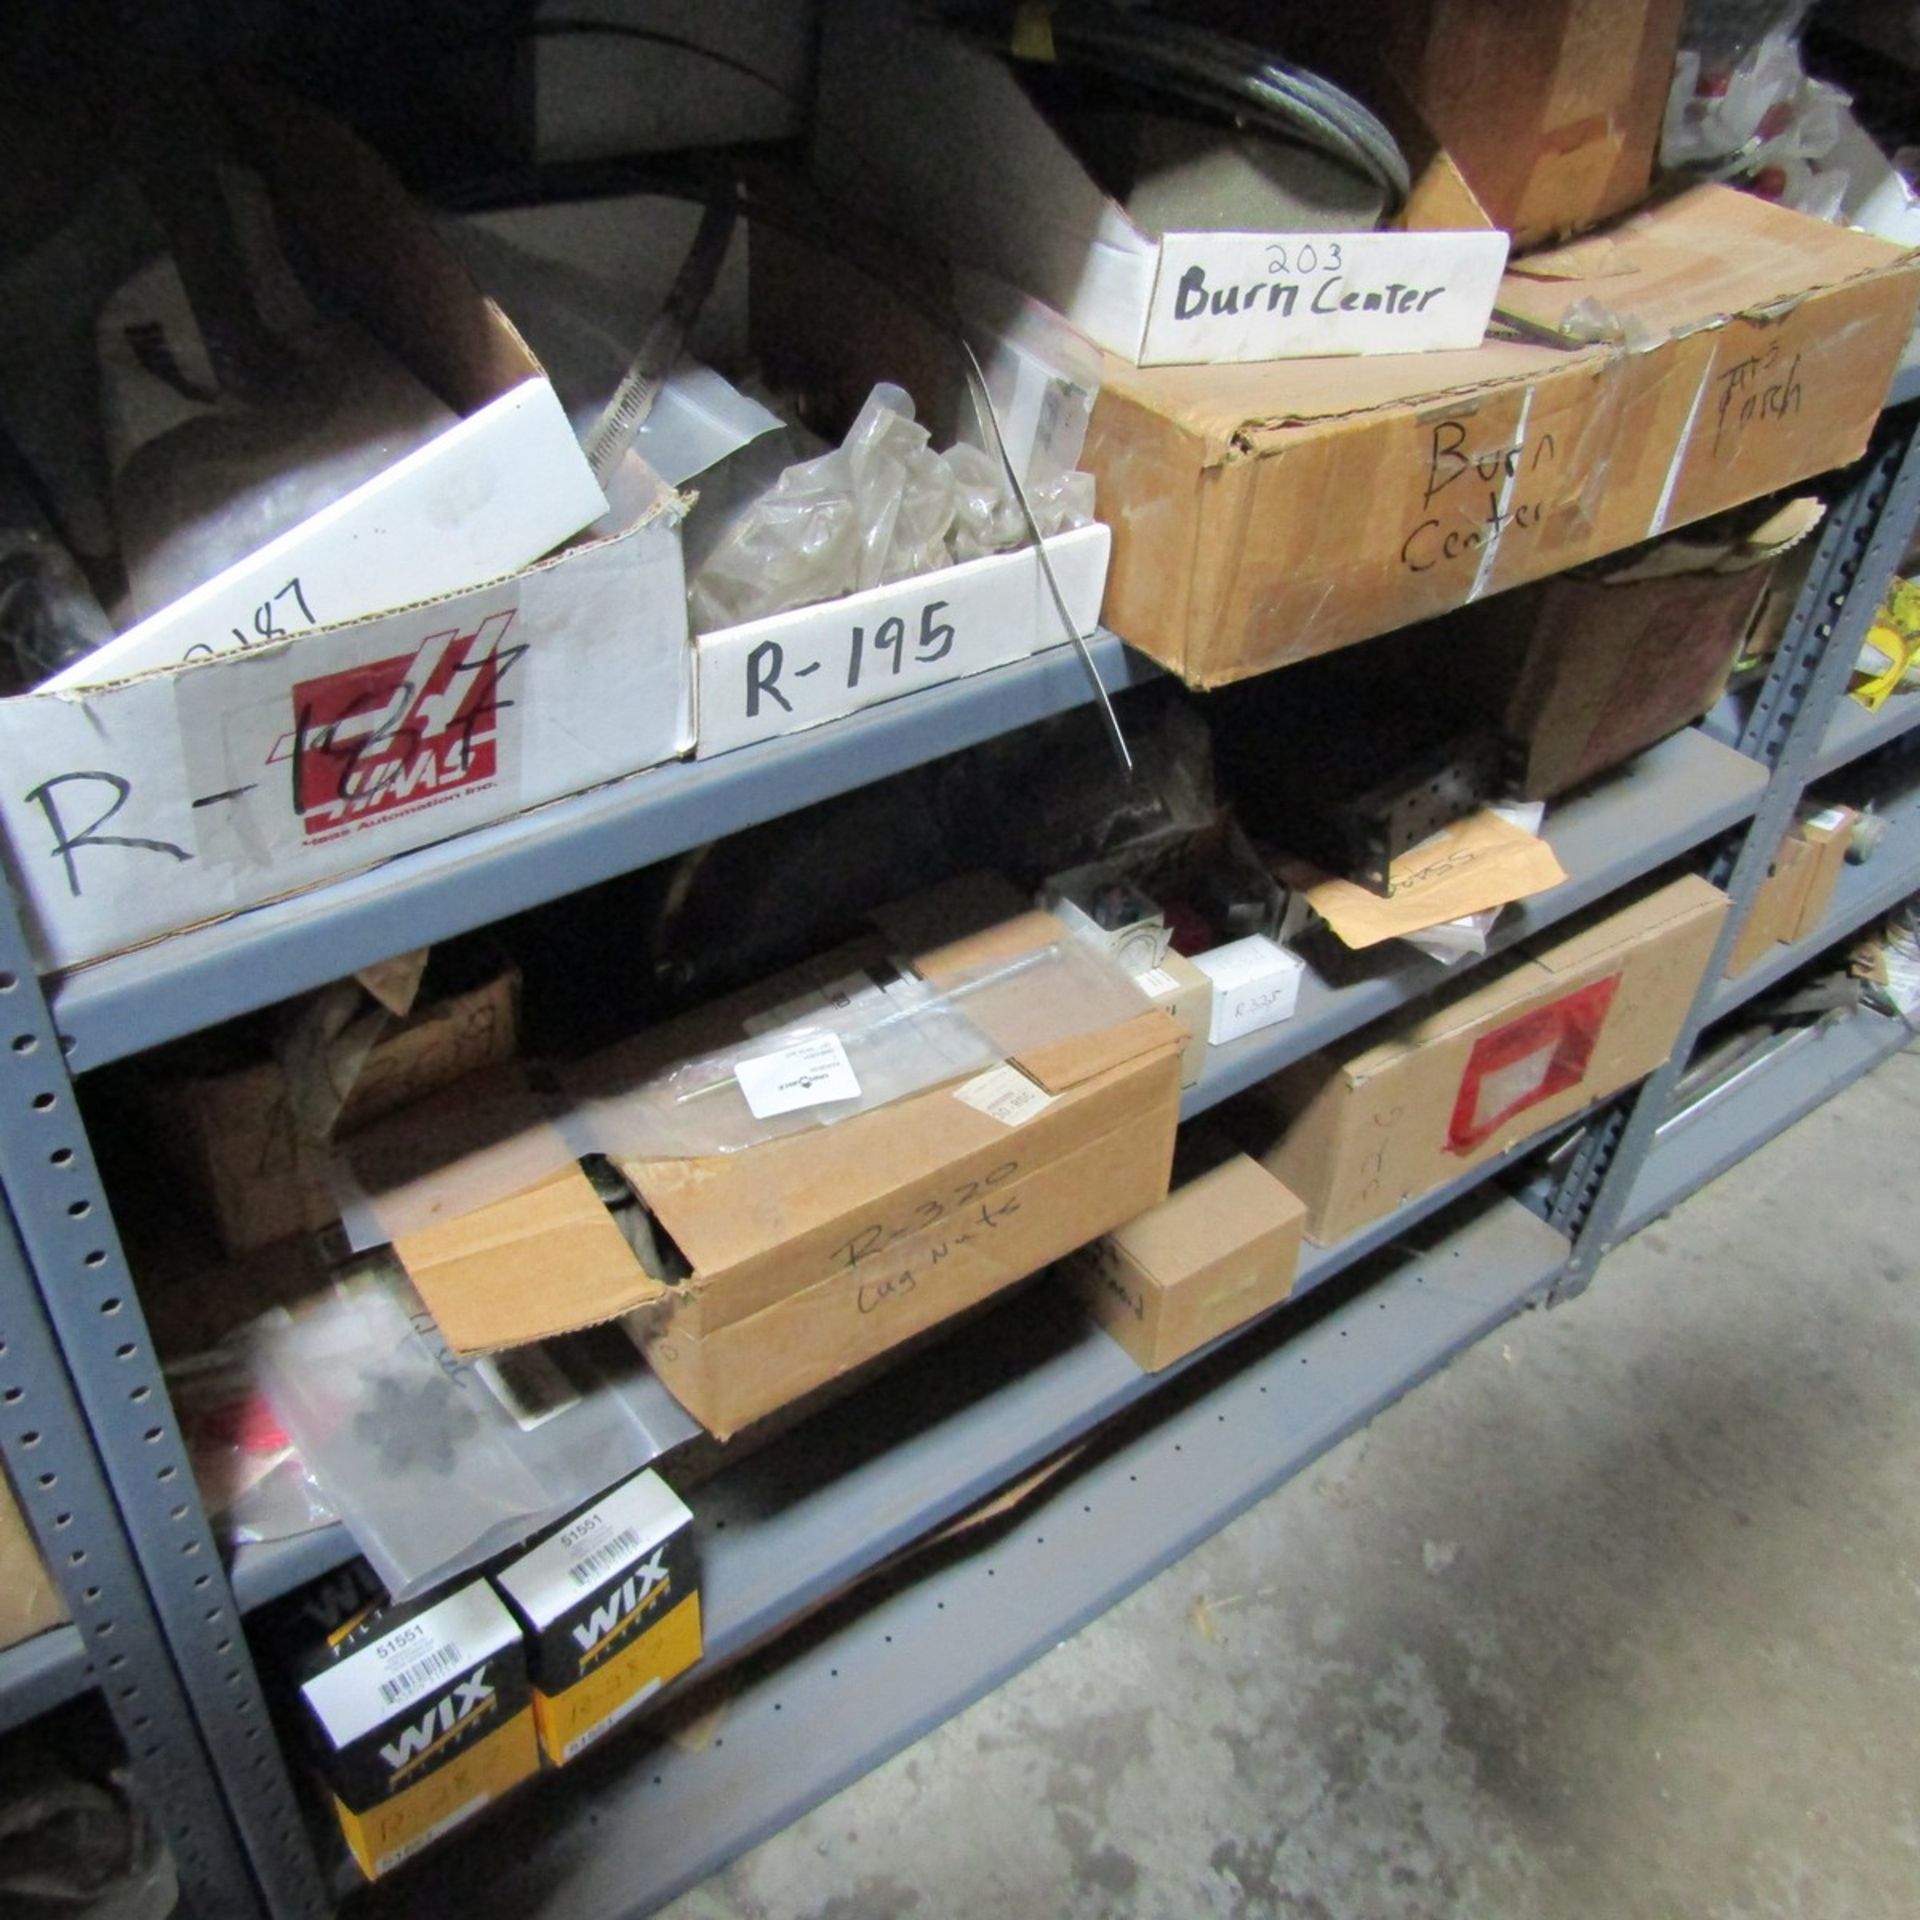 Shelving Units with Contents to Include 74" x 48", Pumps, Connectors, Plugs, Oil Filters, Fittings - Image 13 of 15